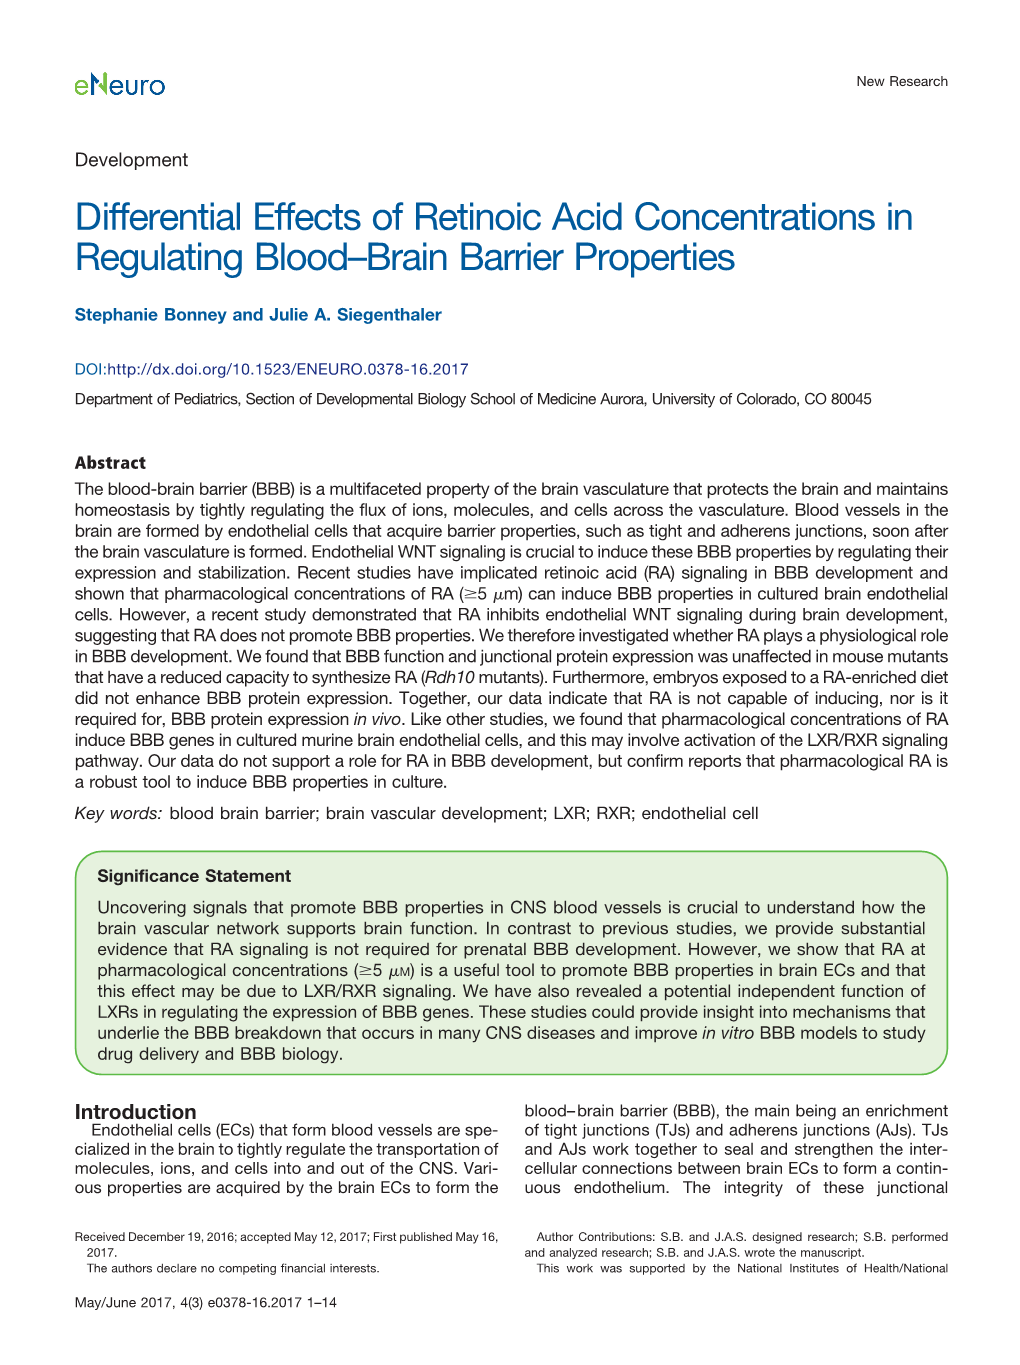 Differential Effects of Retinoic Acid Concentrations in Regulating Blood–Brain Barrier Properties